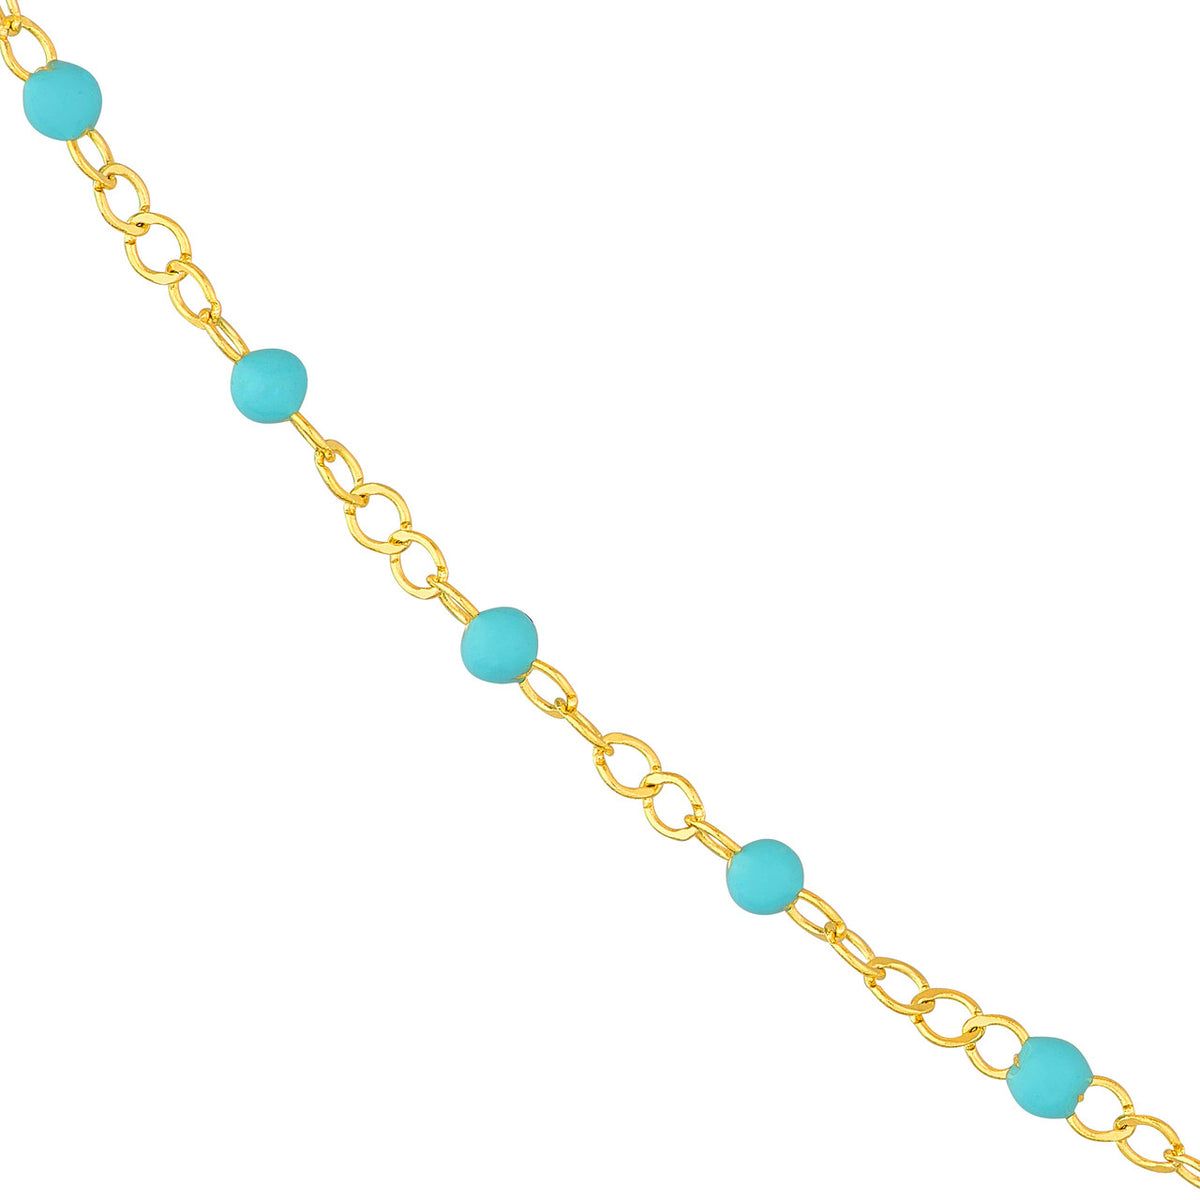 14K Yellow Gold Light Turquoise Enamel Bead on Piatto Chain Necklace Adjustable